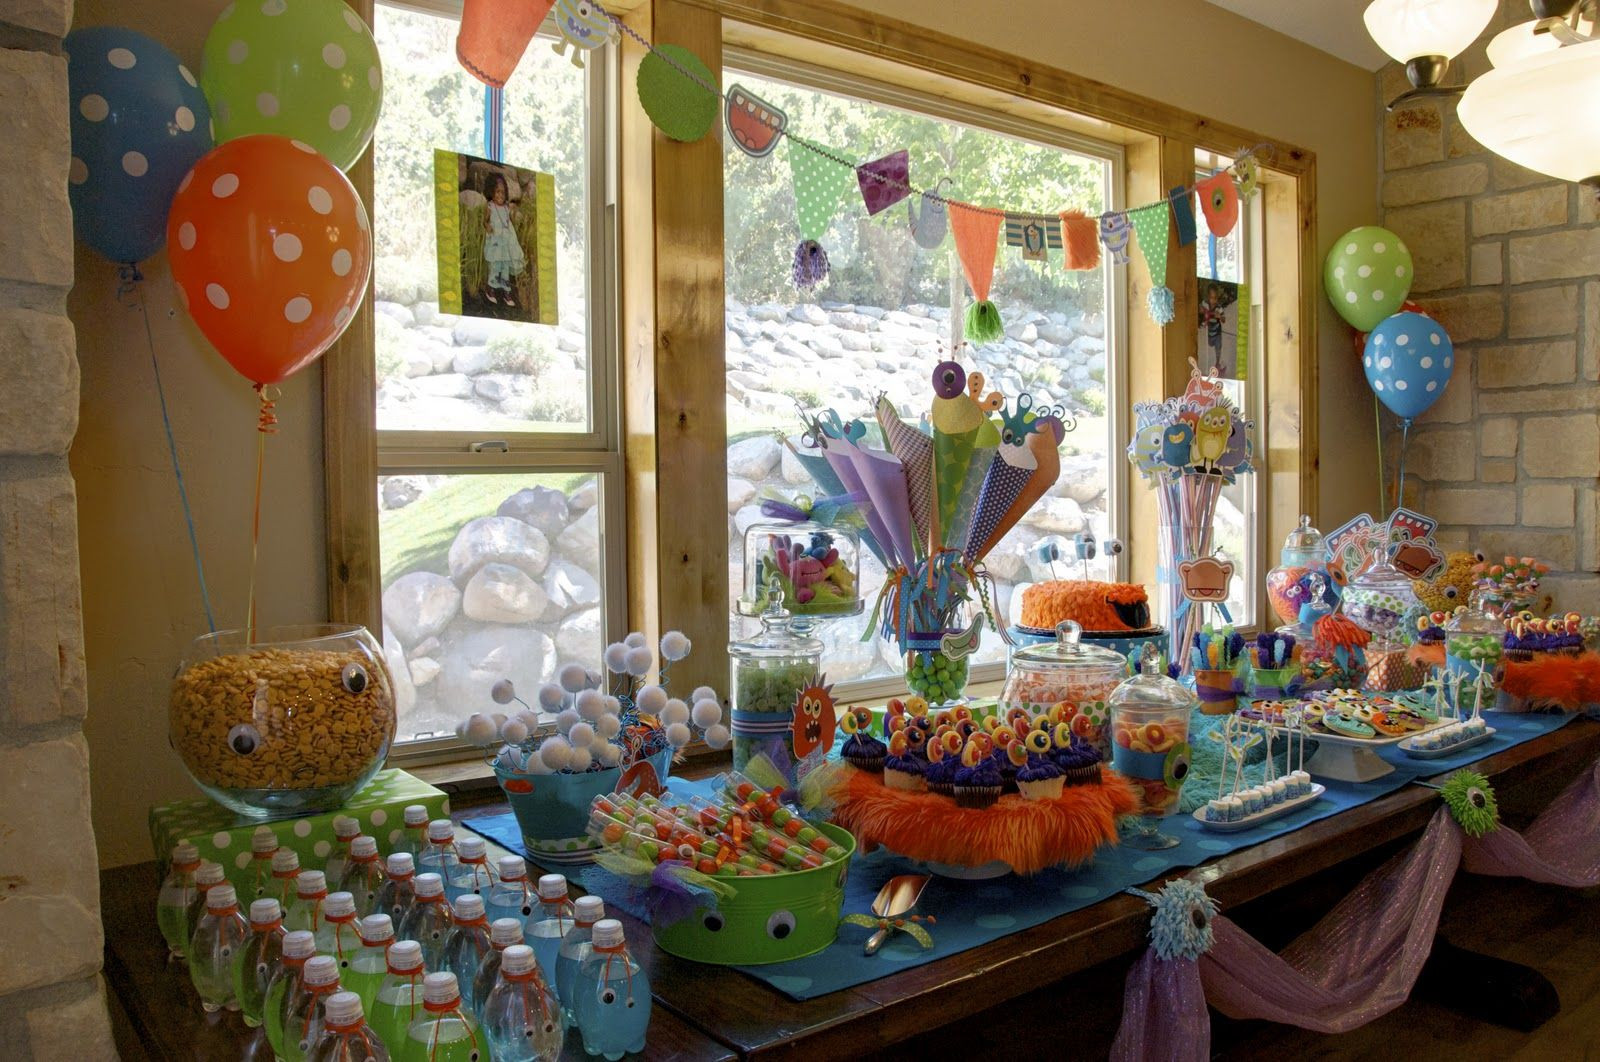 Ideas For 13 Year Old Girl Birthday Party
 My friends birthday is in the winter and she wanteâ Š